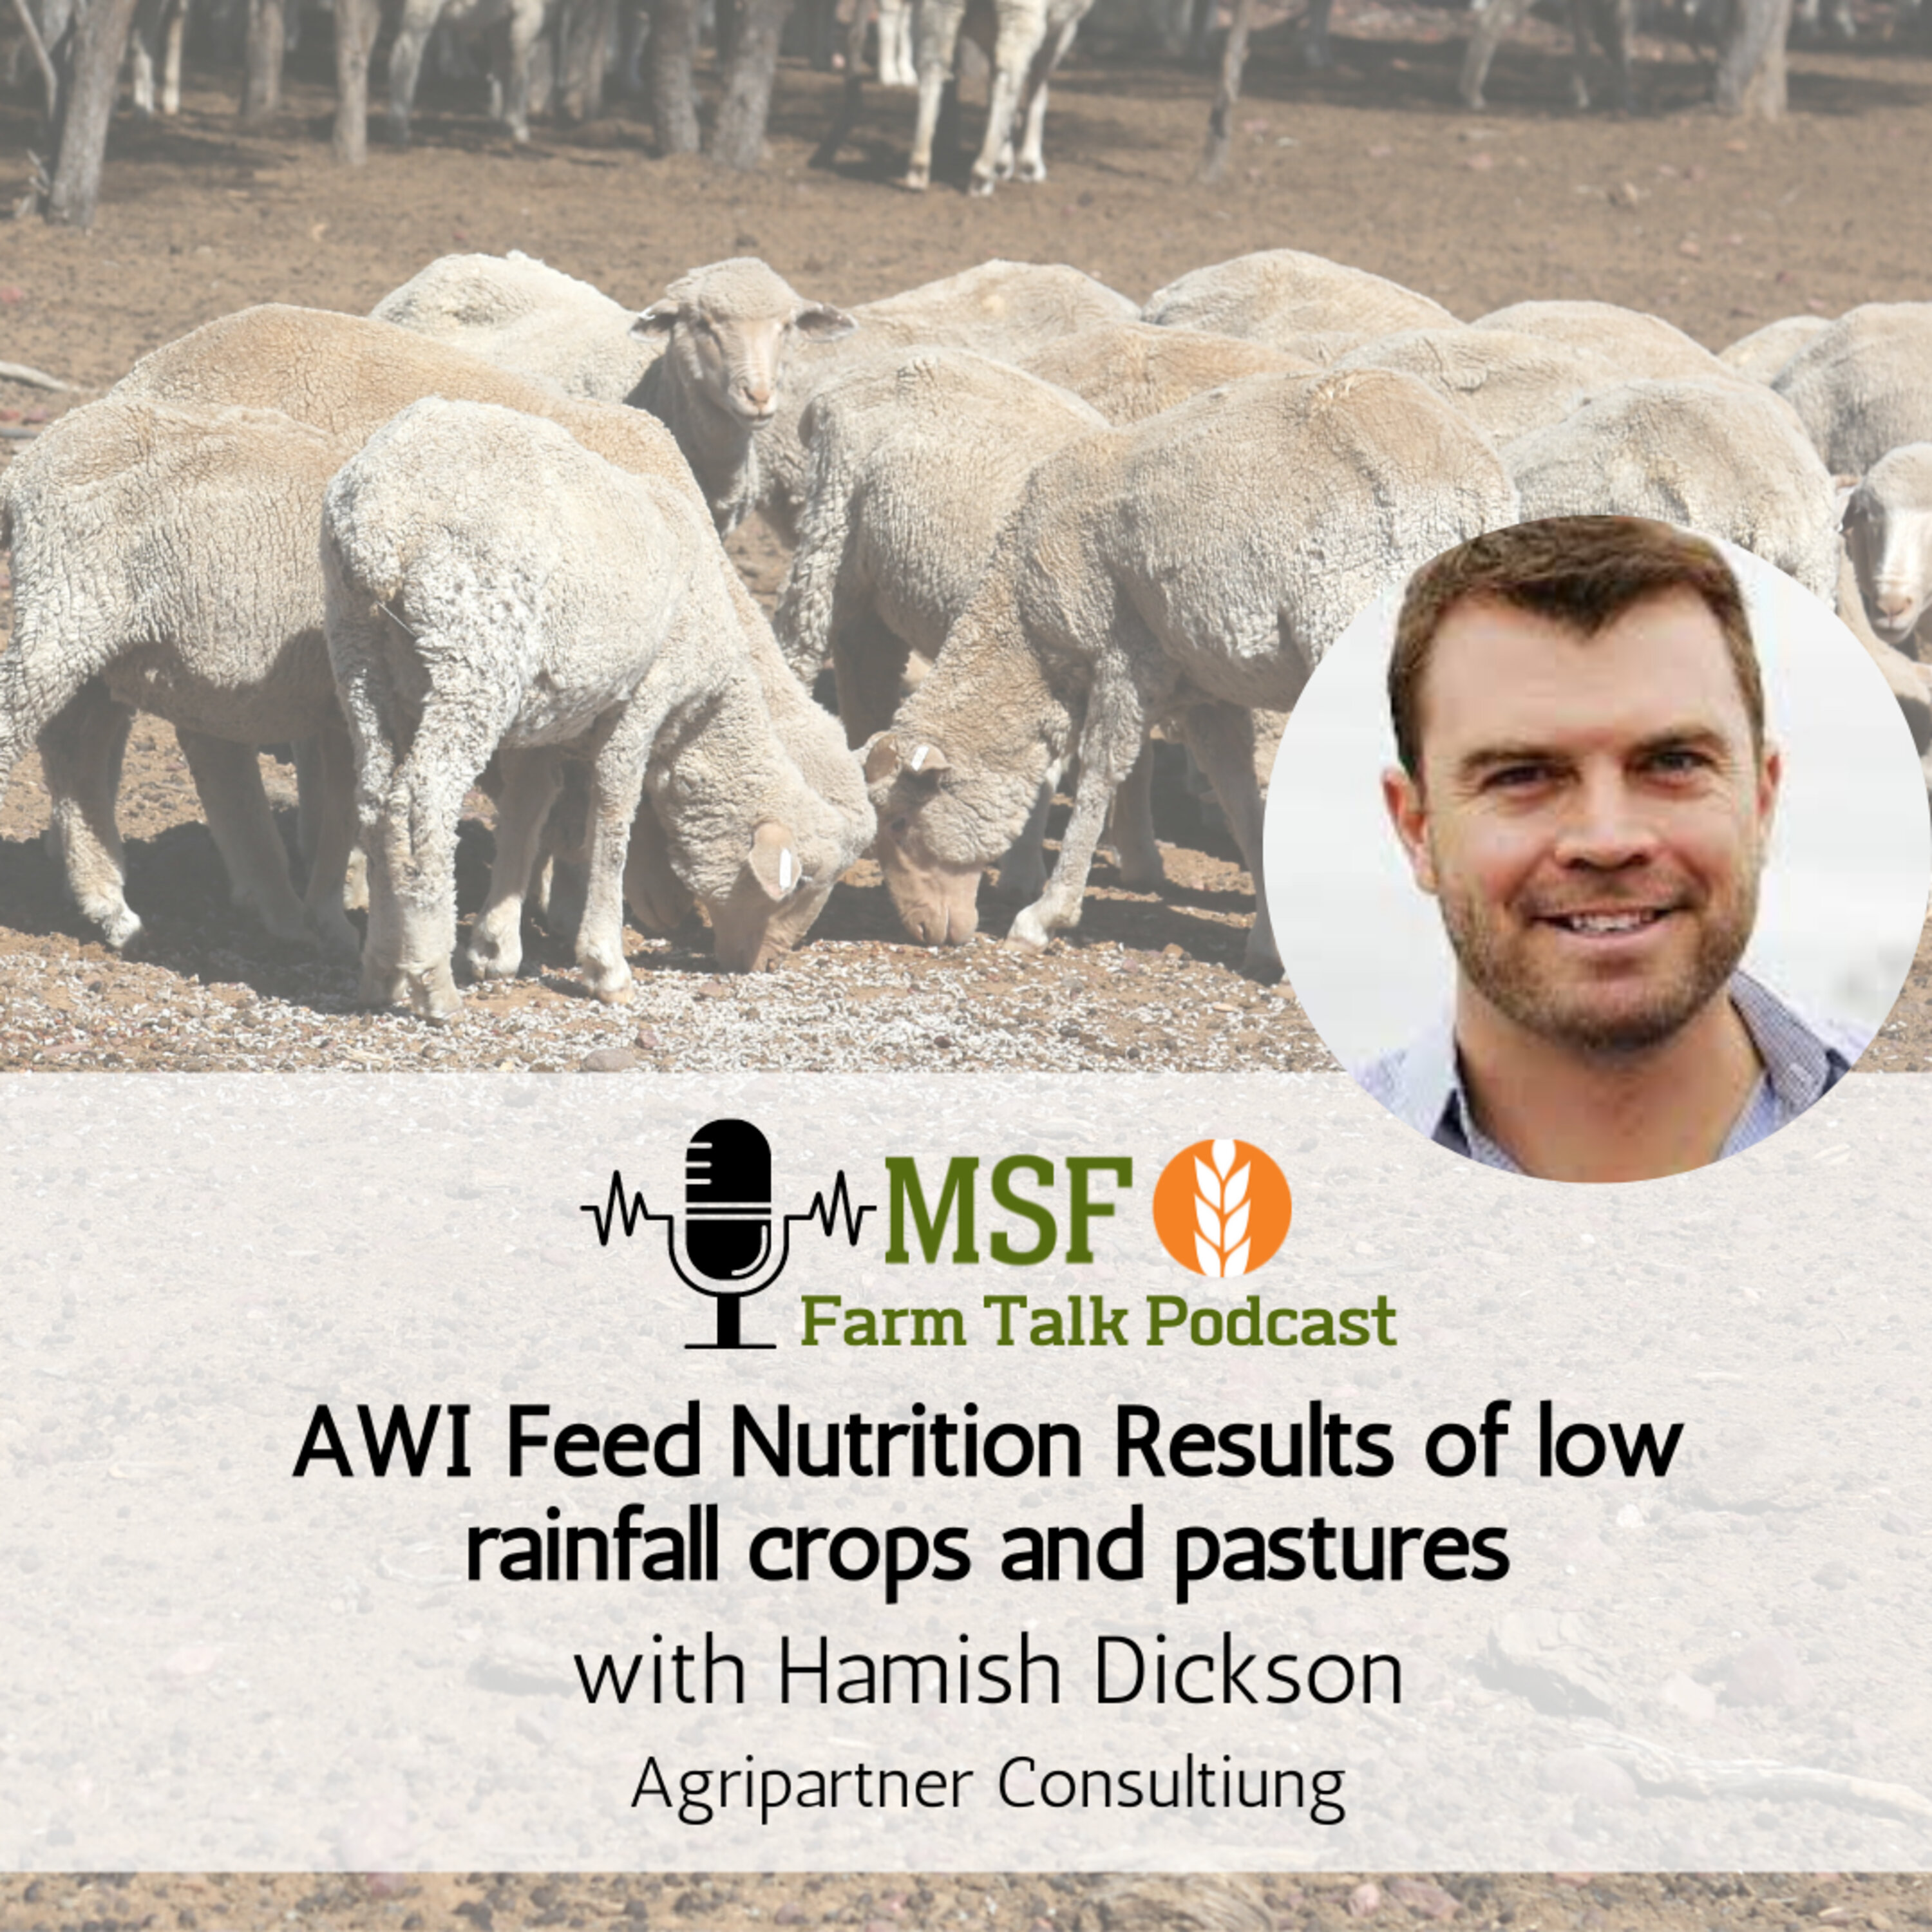 AWI Feed Nutrition results of low rainfall crops and pastures